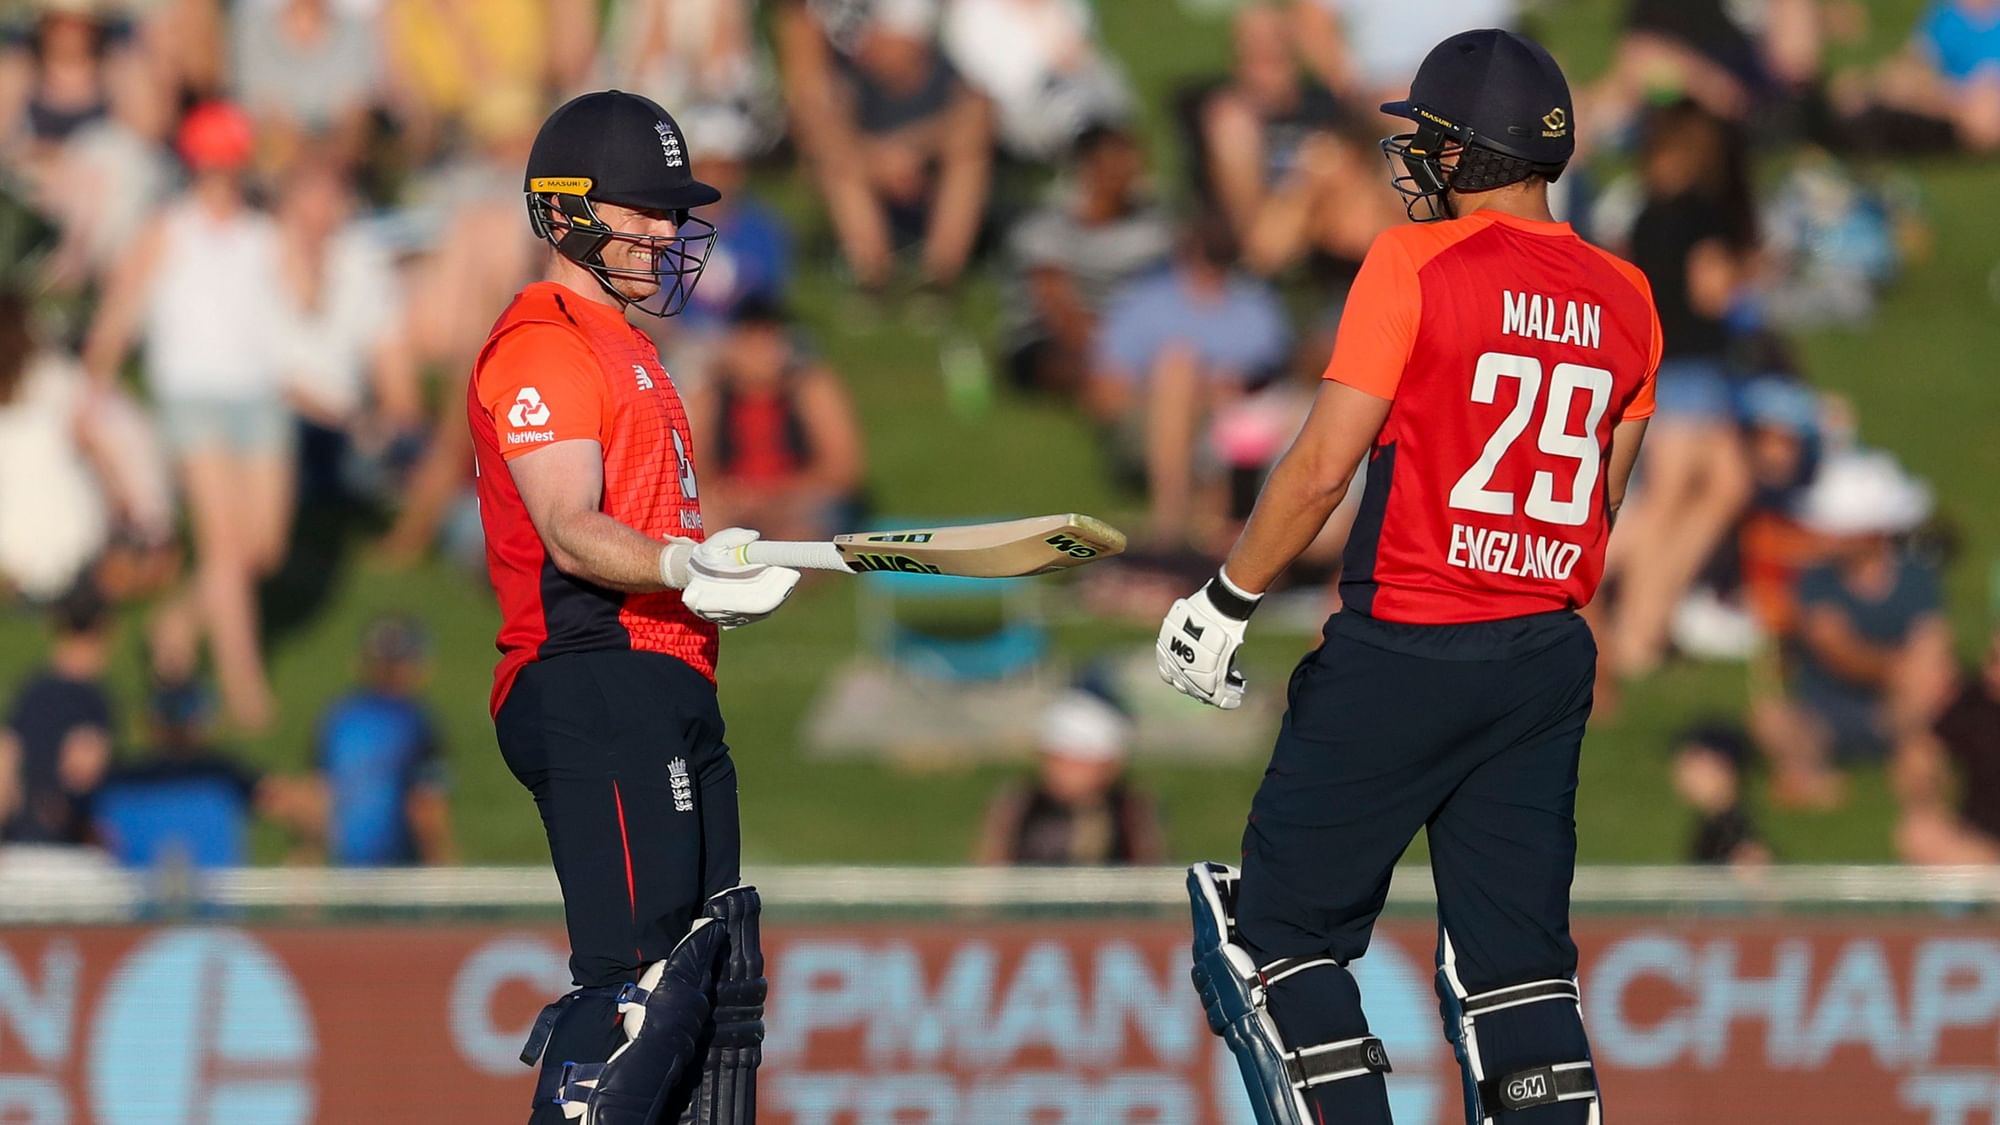 The 182-run partnership between Malan and Morgan for the third wicket is now the highest ever stand for the Three Lions across all wickets.